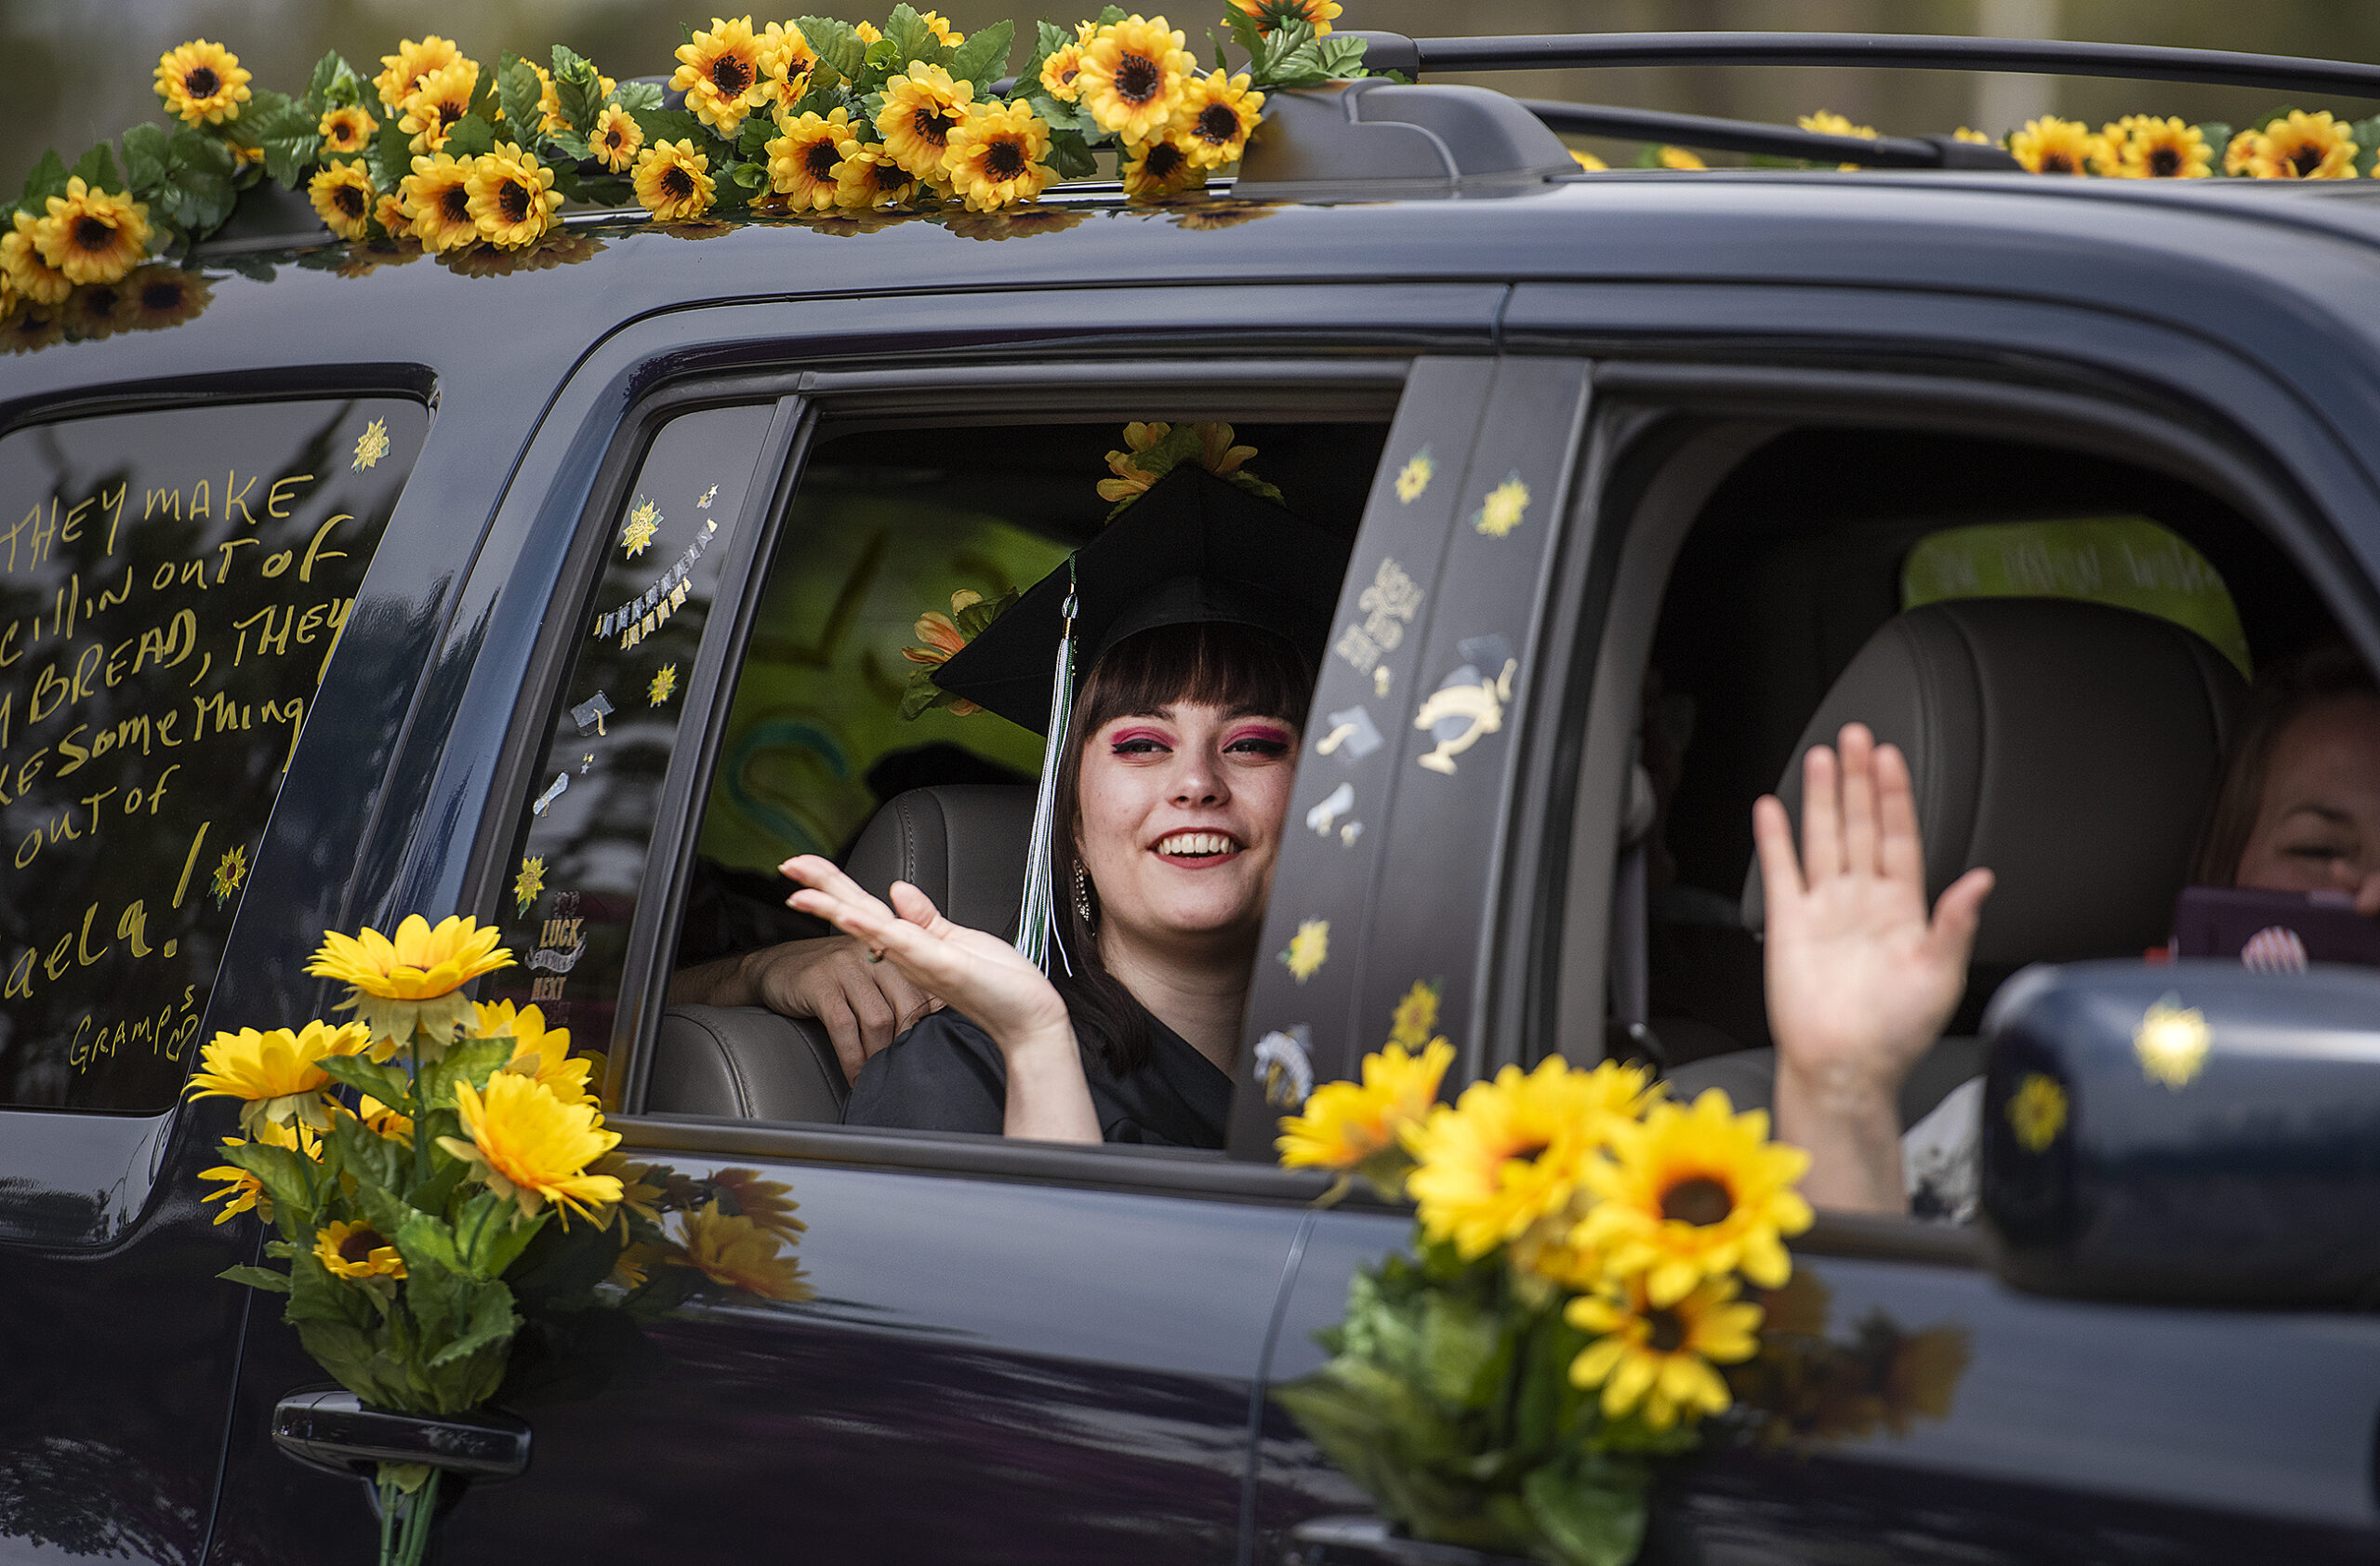 A graduate waves from inside of a vehicle decorated with yellow sunflowers.